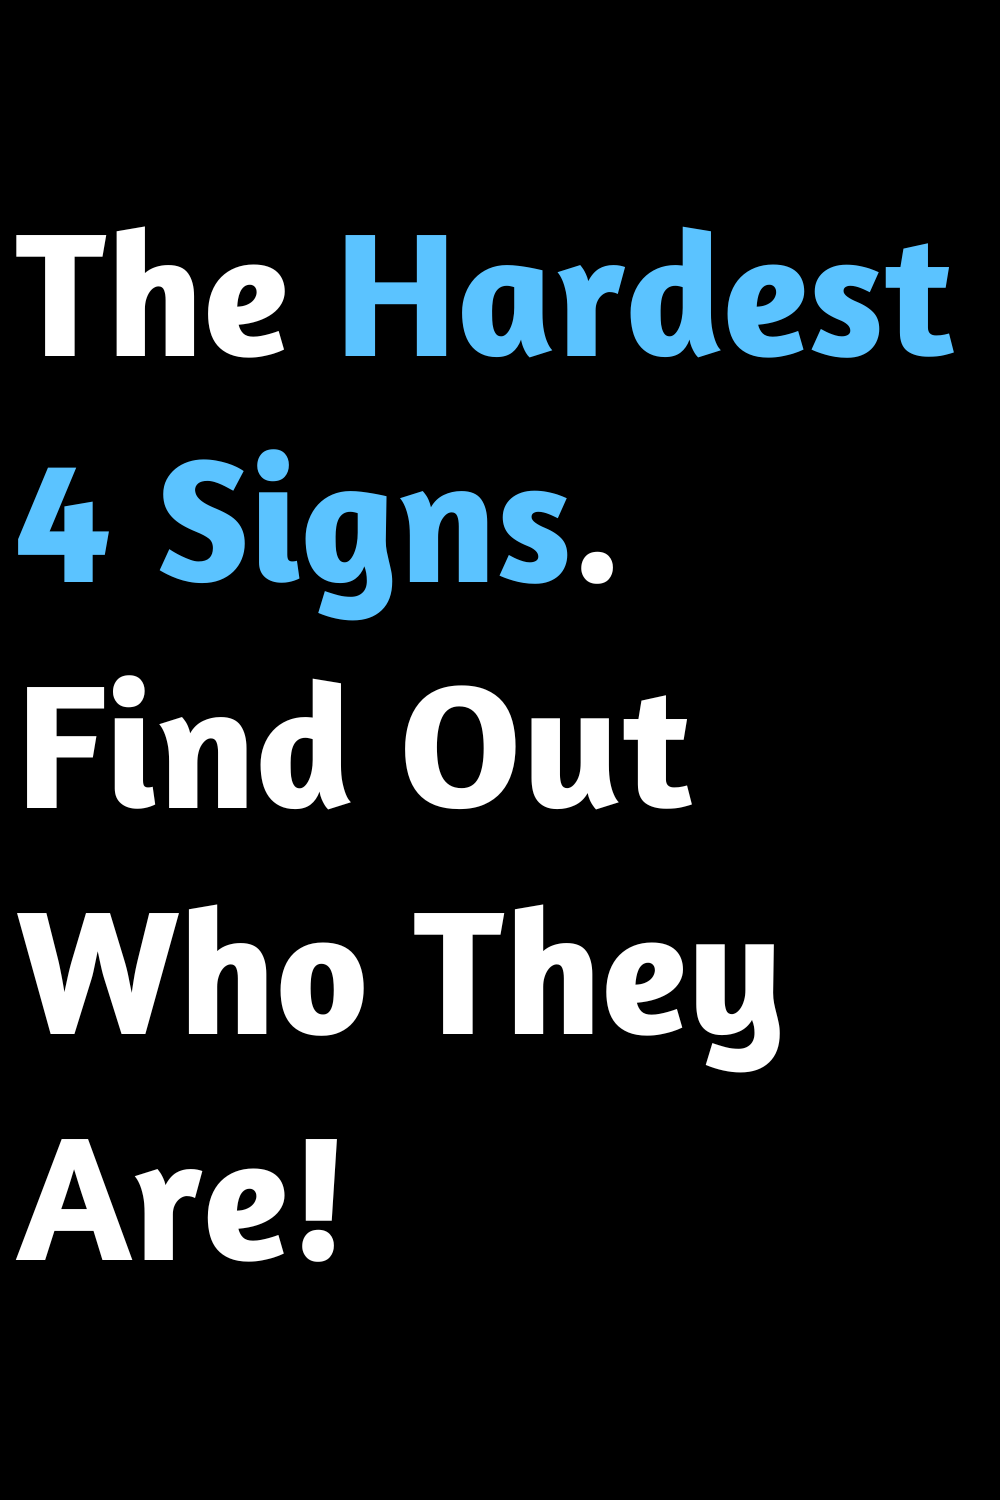 The Hardest 4 Signs. Find Out Who They Are!